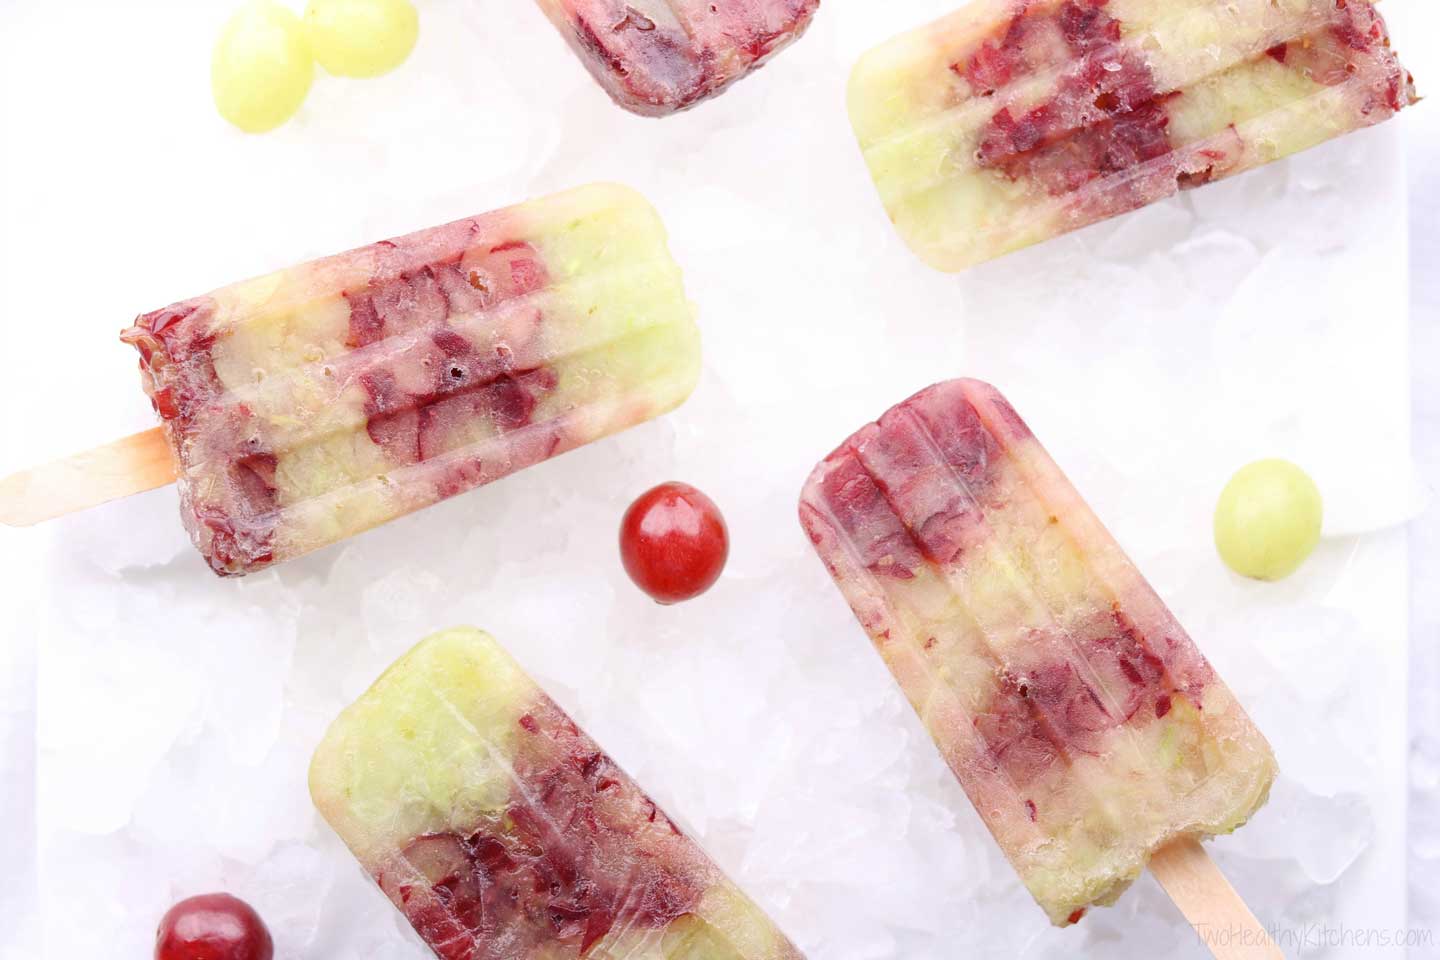 Several striped, frozen grape pops on ice with single green and red grapes scattered amongst.